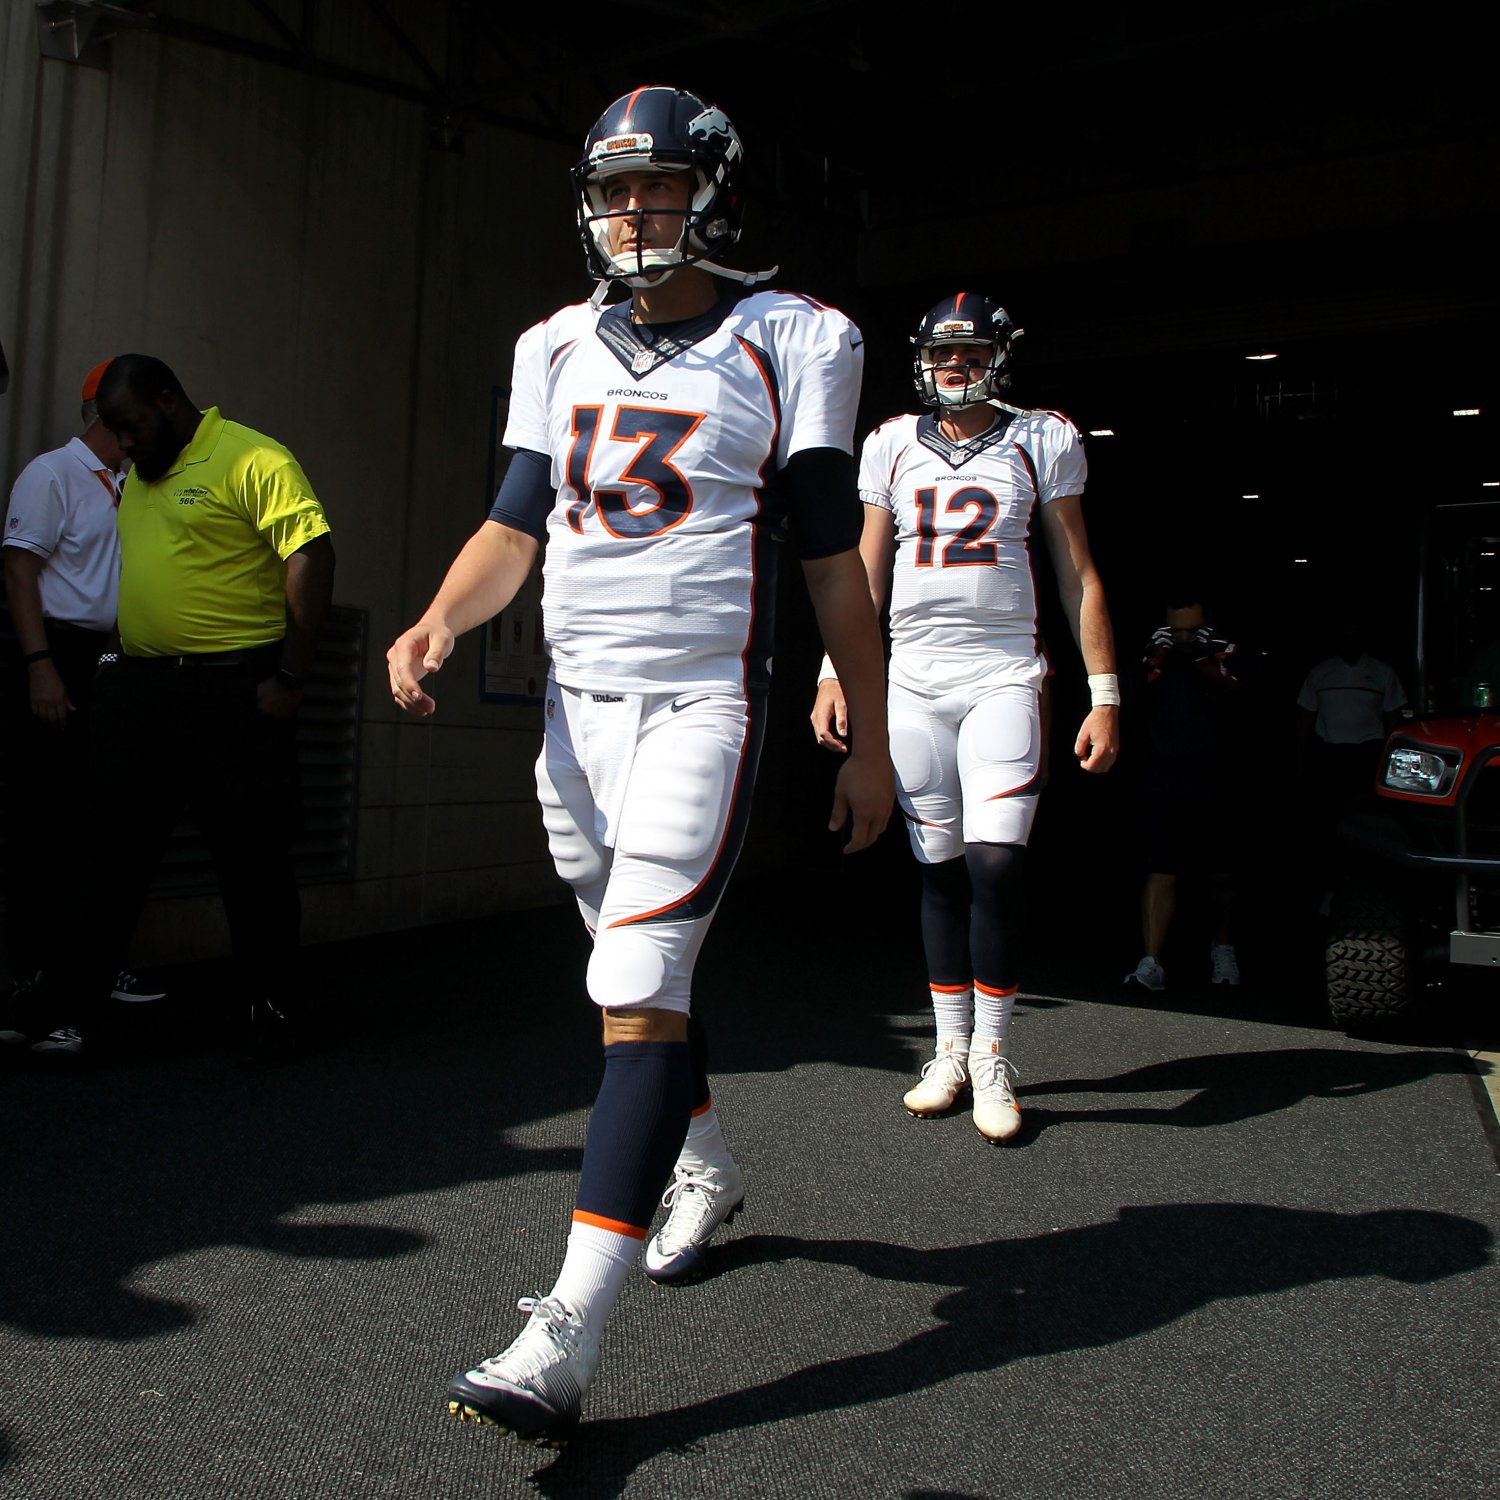 John Elway Comments on Trevor Siemian, Paxton Lynch Ahead of Broncos vs. Raiders